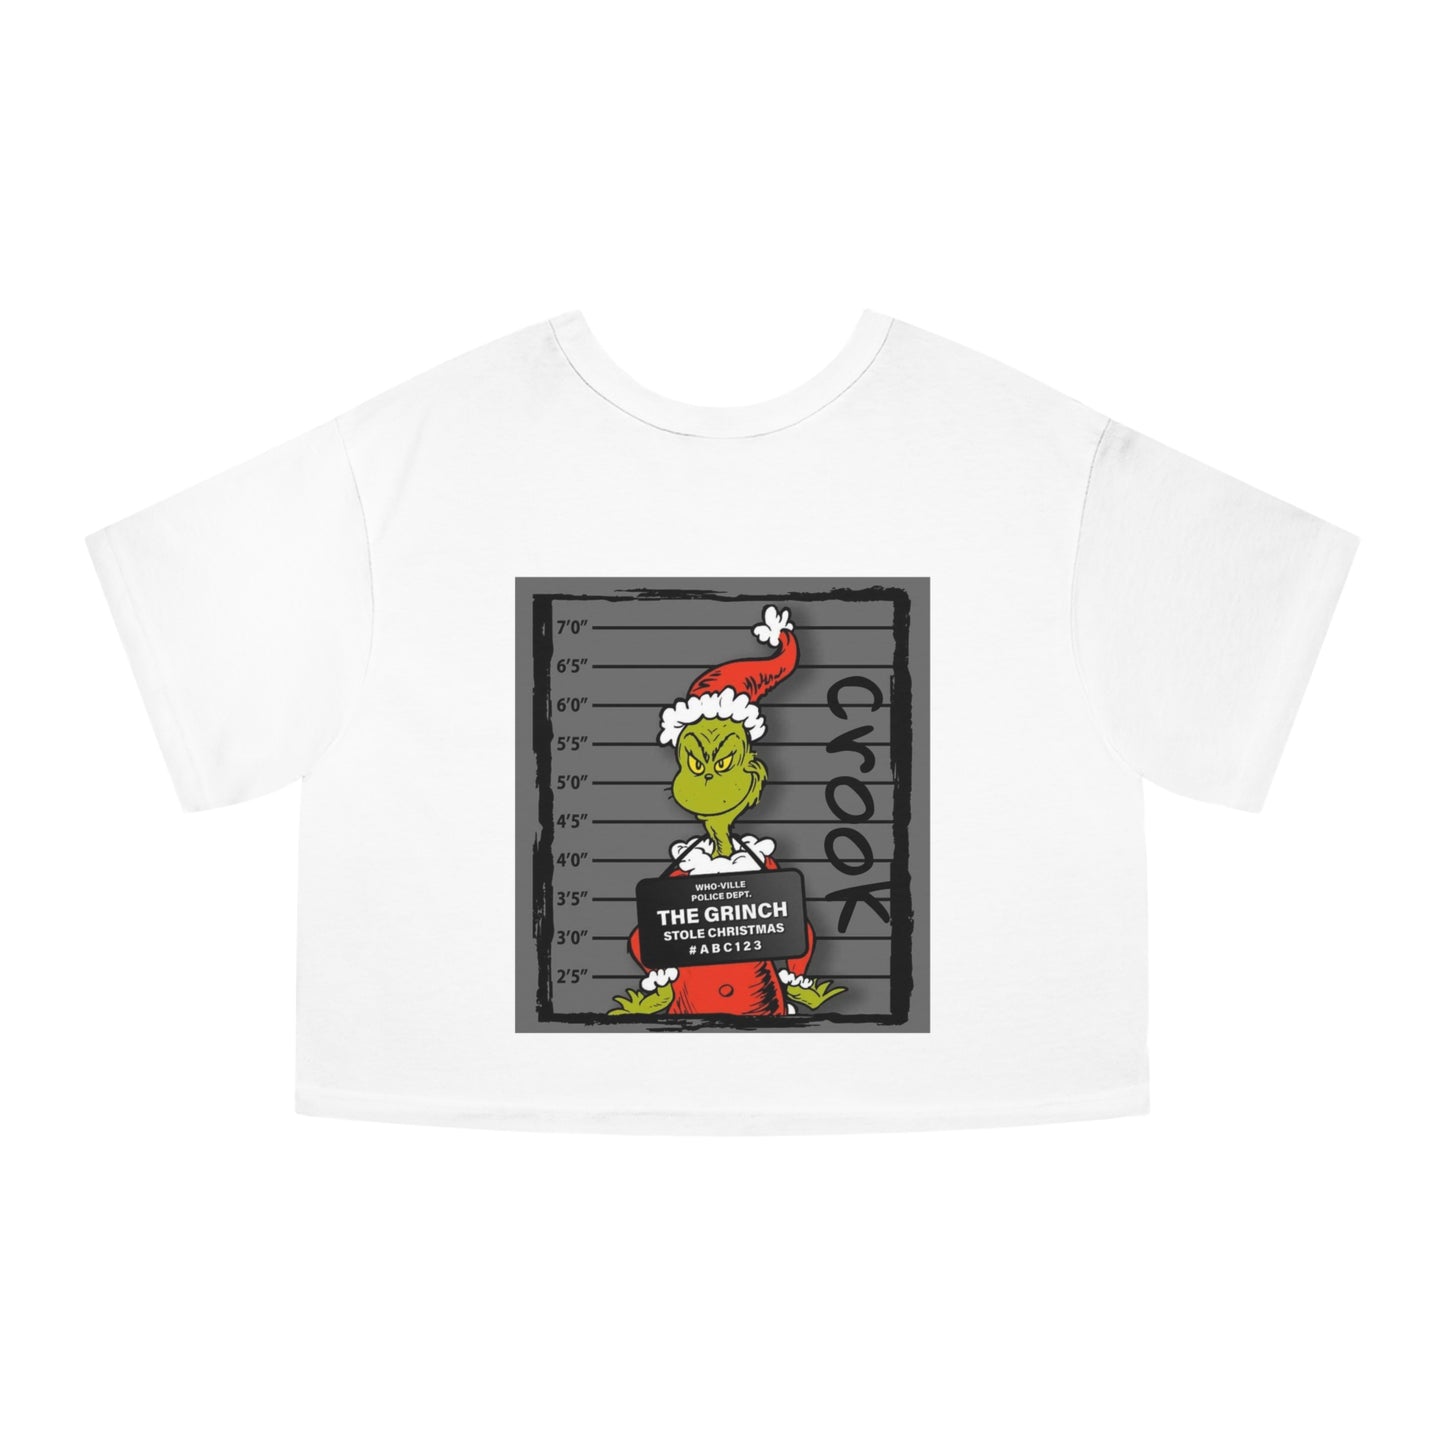 Forensic Files Grinch Champion Women's Heritage Cropped T-Shirt